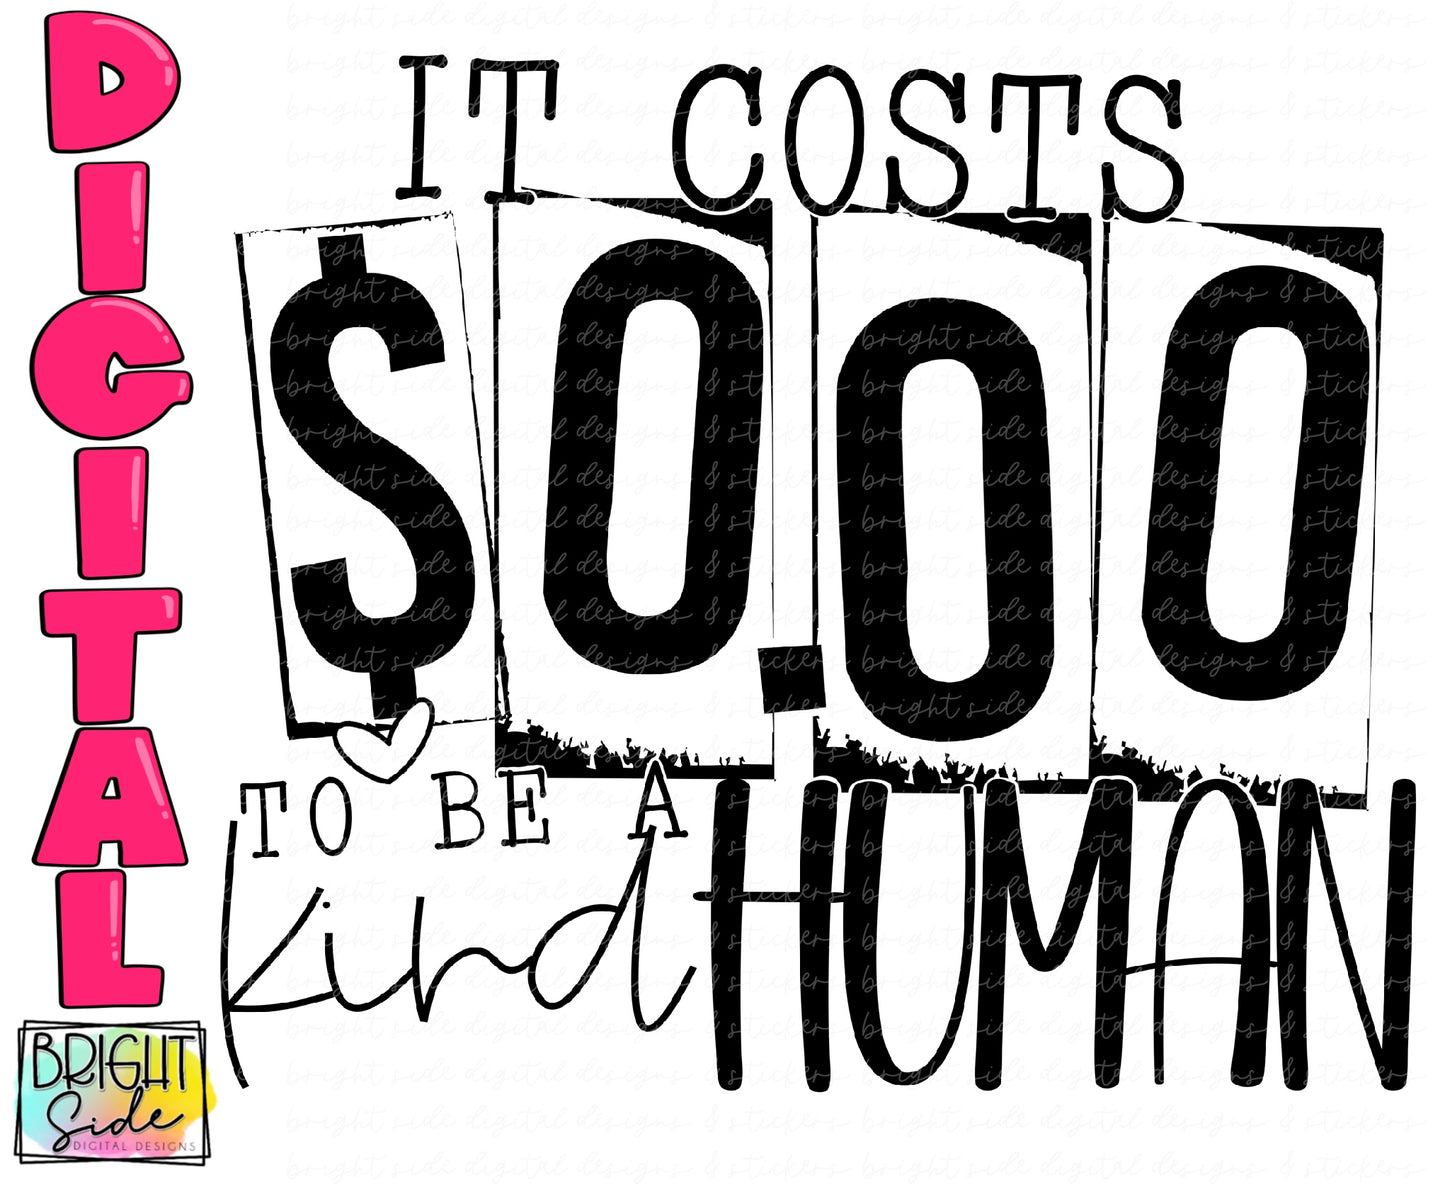 It costs 0.00 to be a kind human